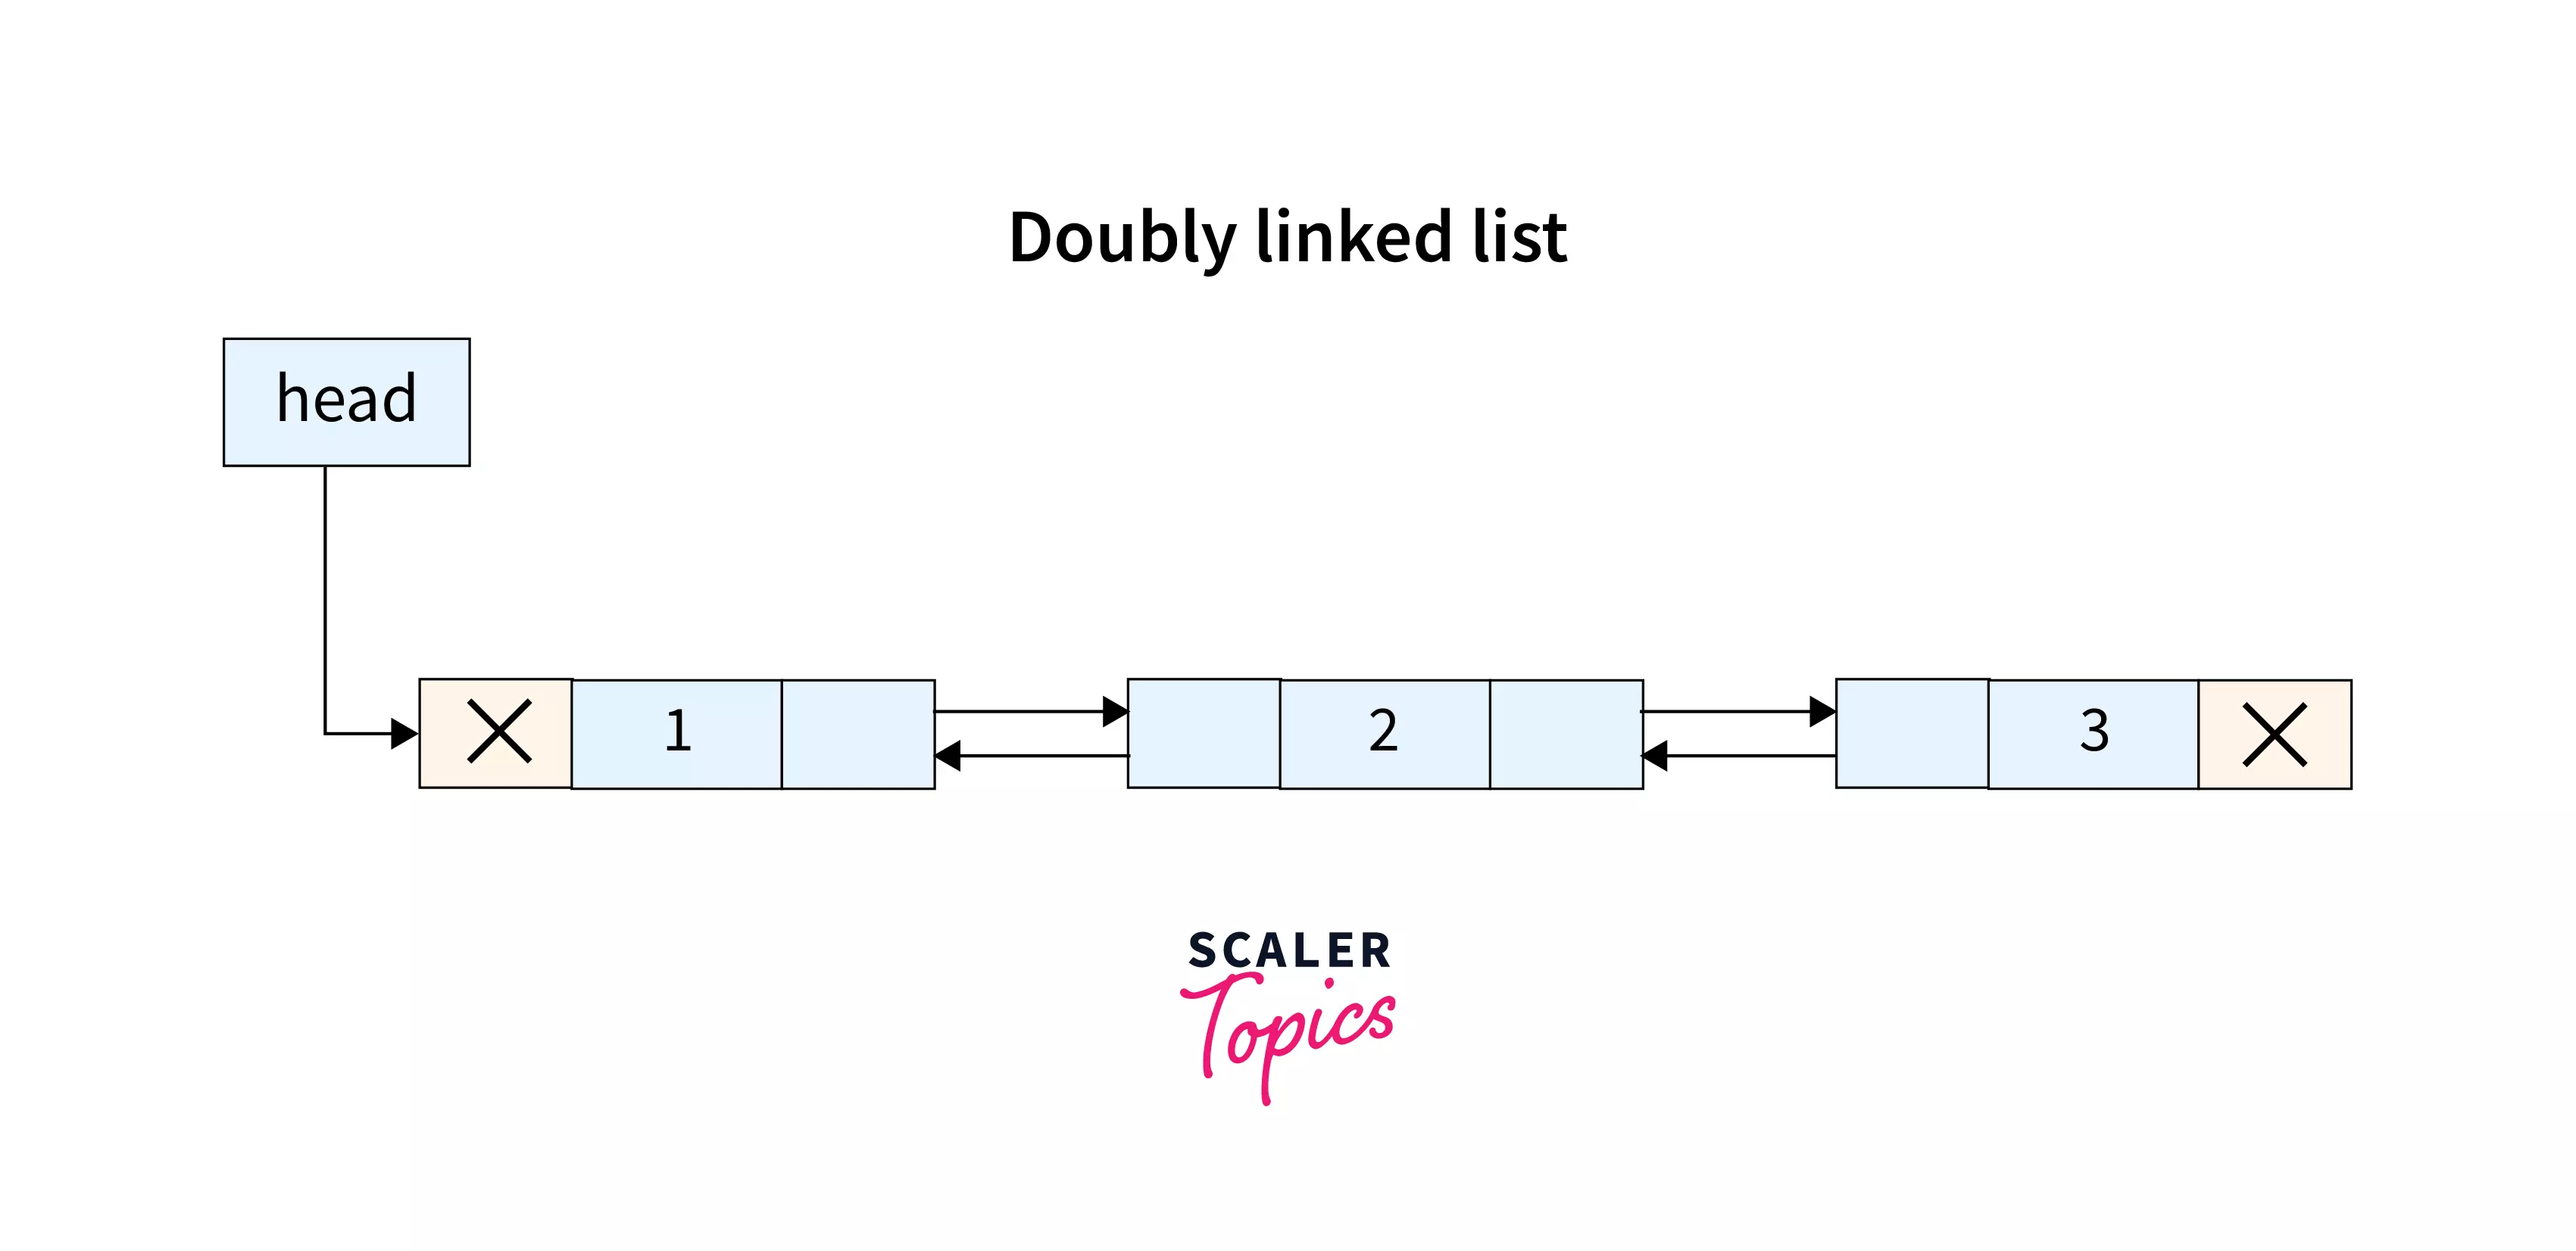 image of doubly linked list